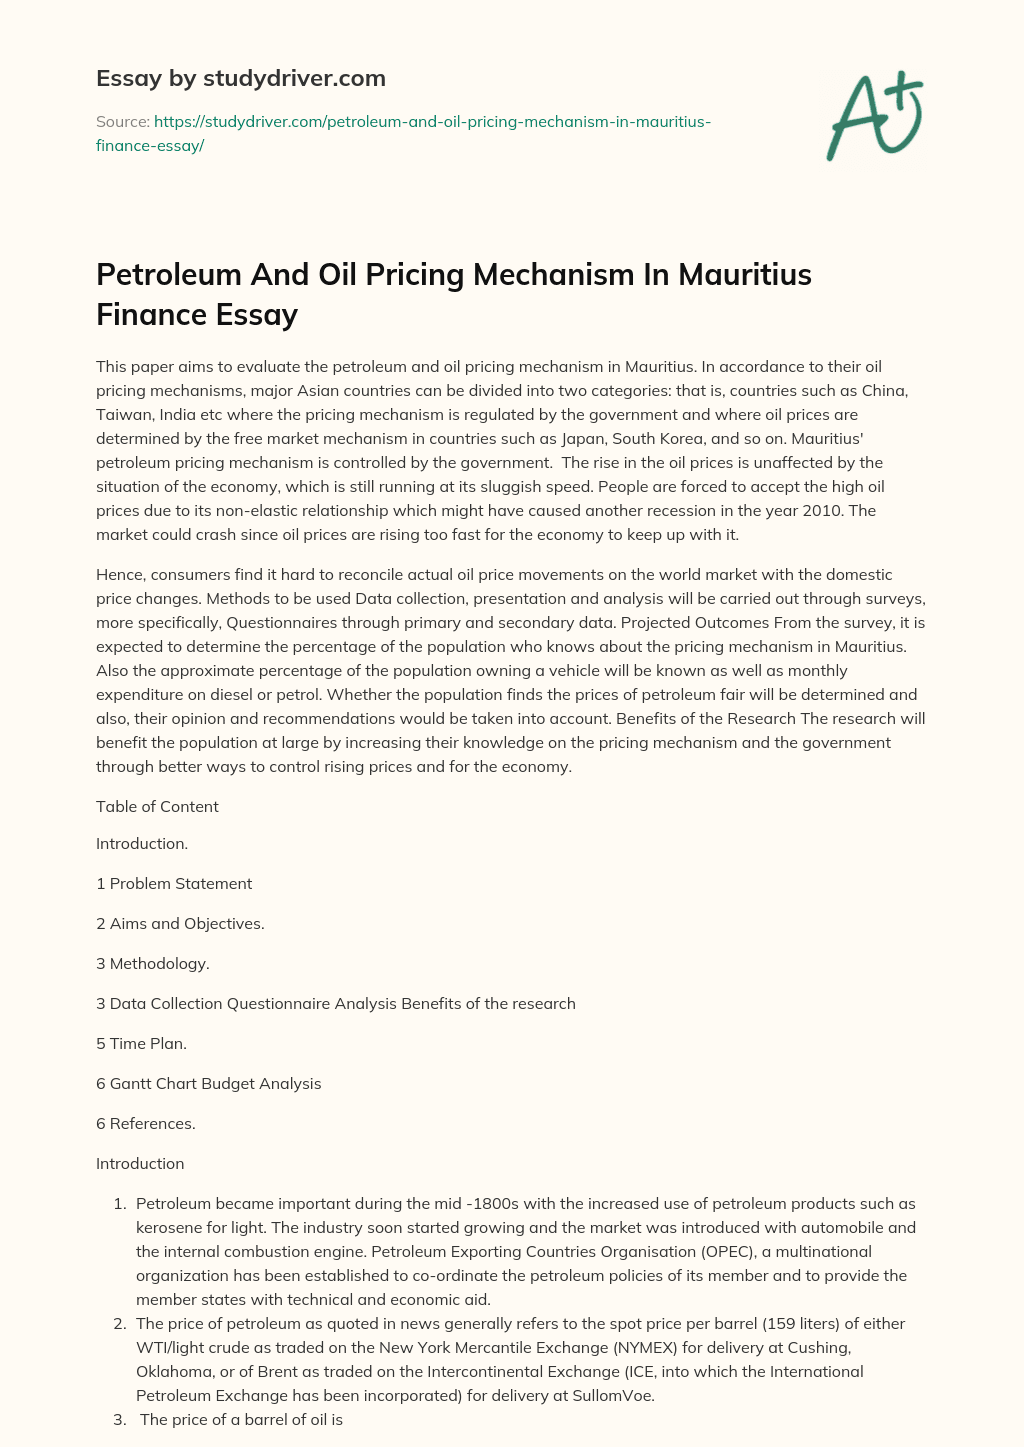 Petroleum and Oil Pricing Mechanism in Mauritius Finance Essay essay